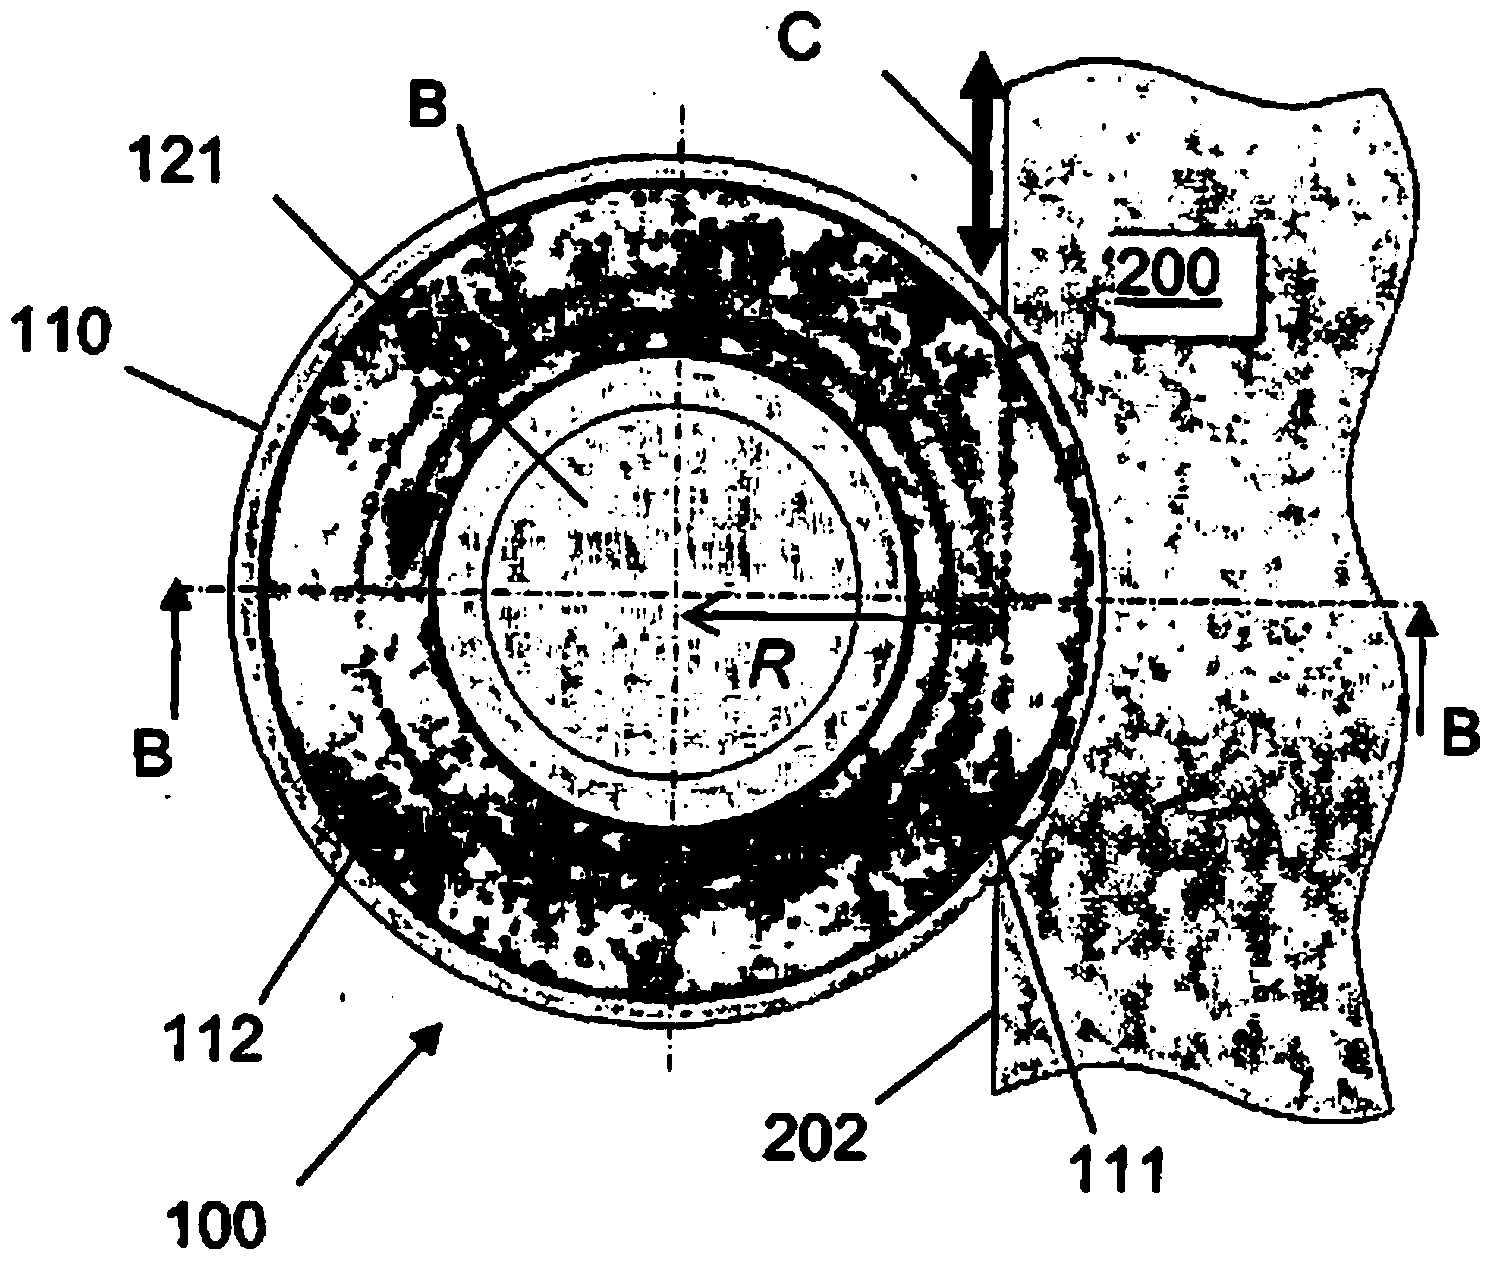 Apparatus and method for polishing an edge of an article using magnetorheological (MR) fluid